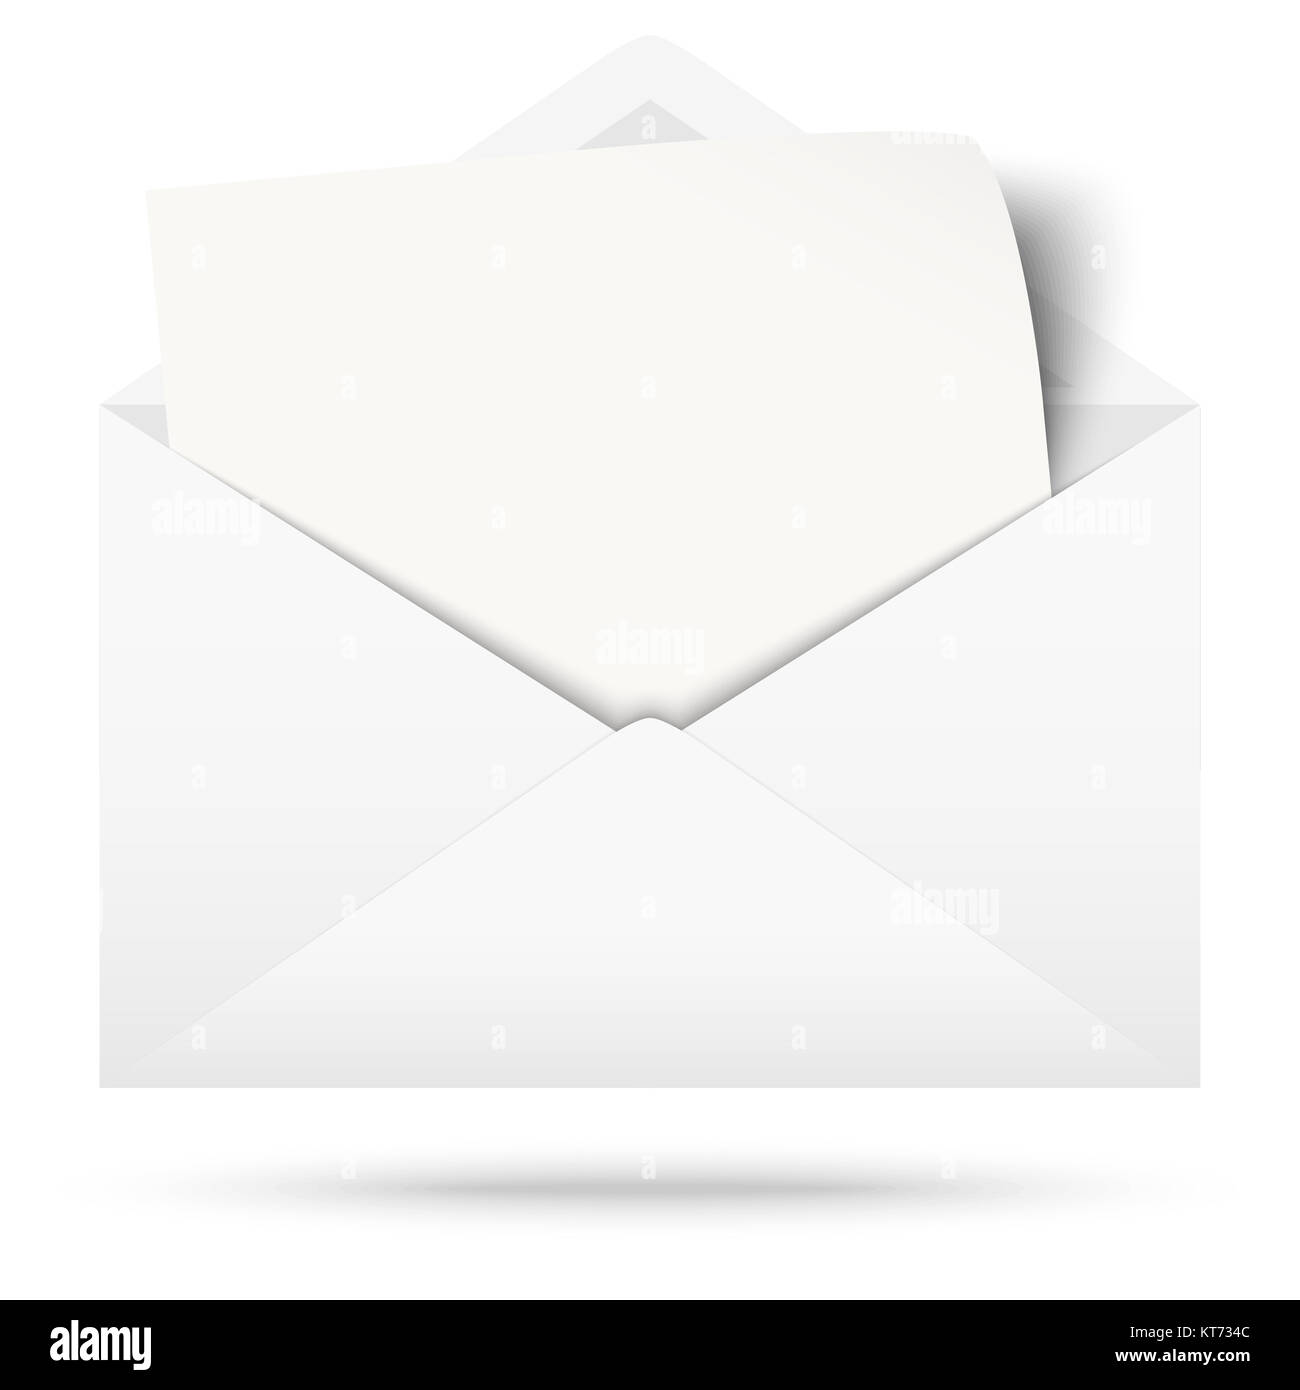 white envelope opened with empty white paper and shadow Stock Photo